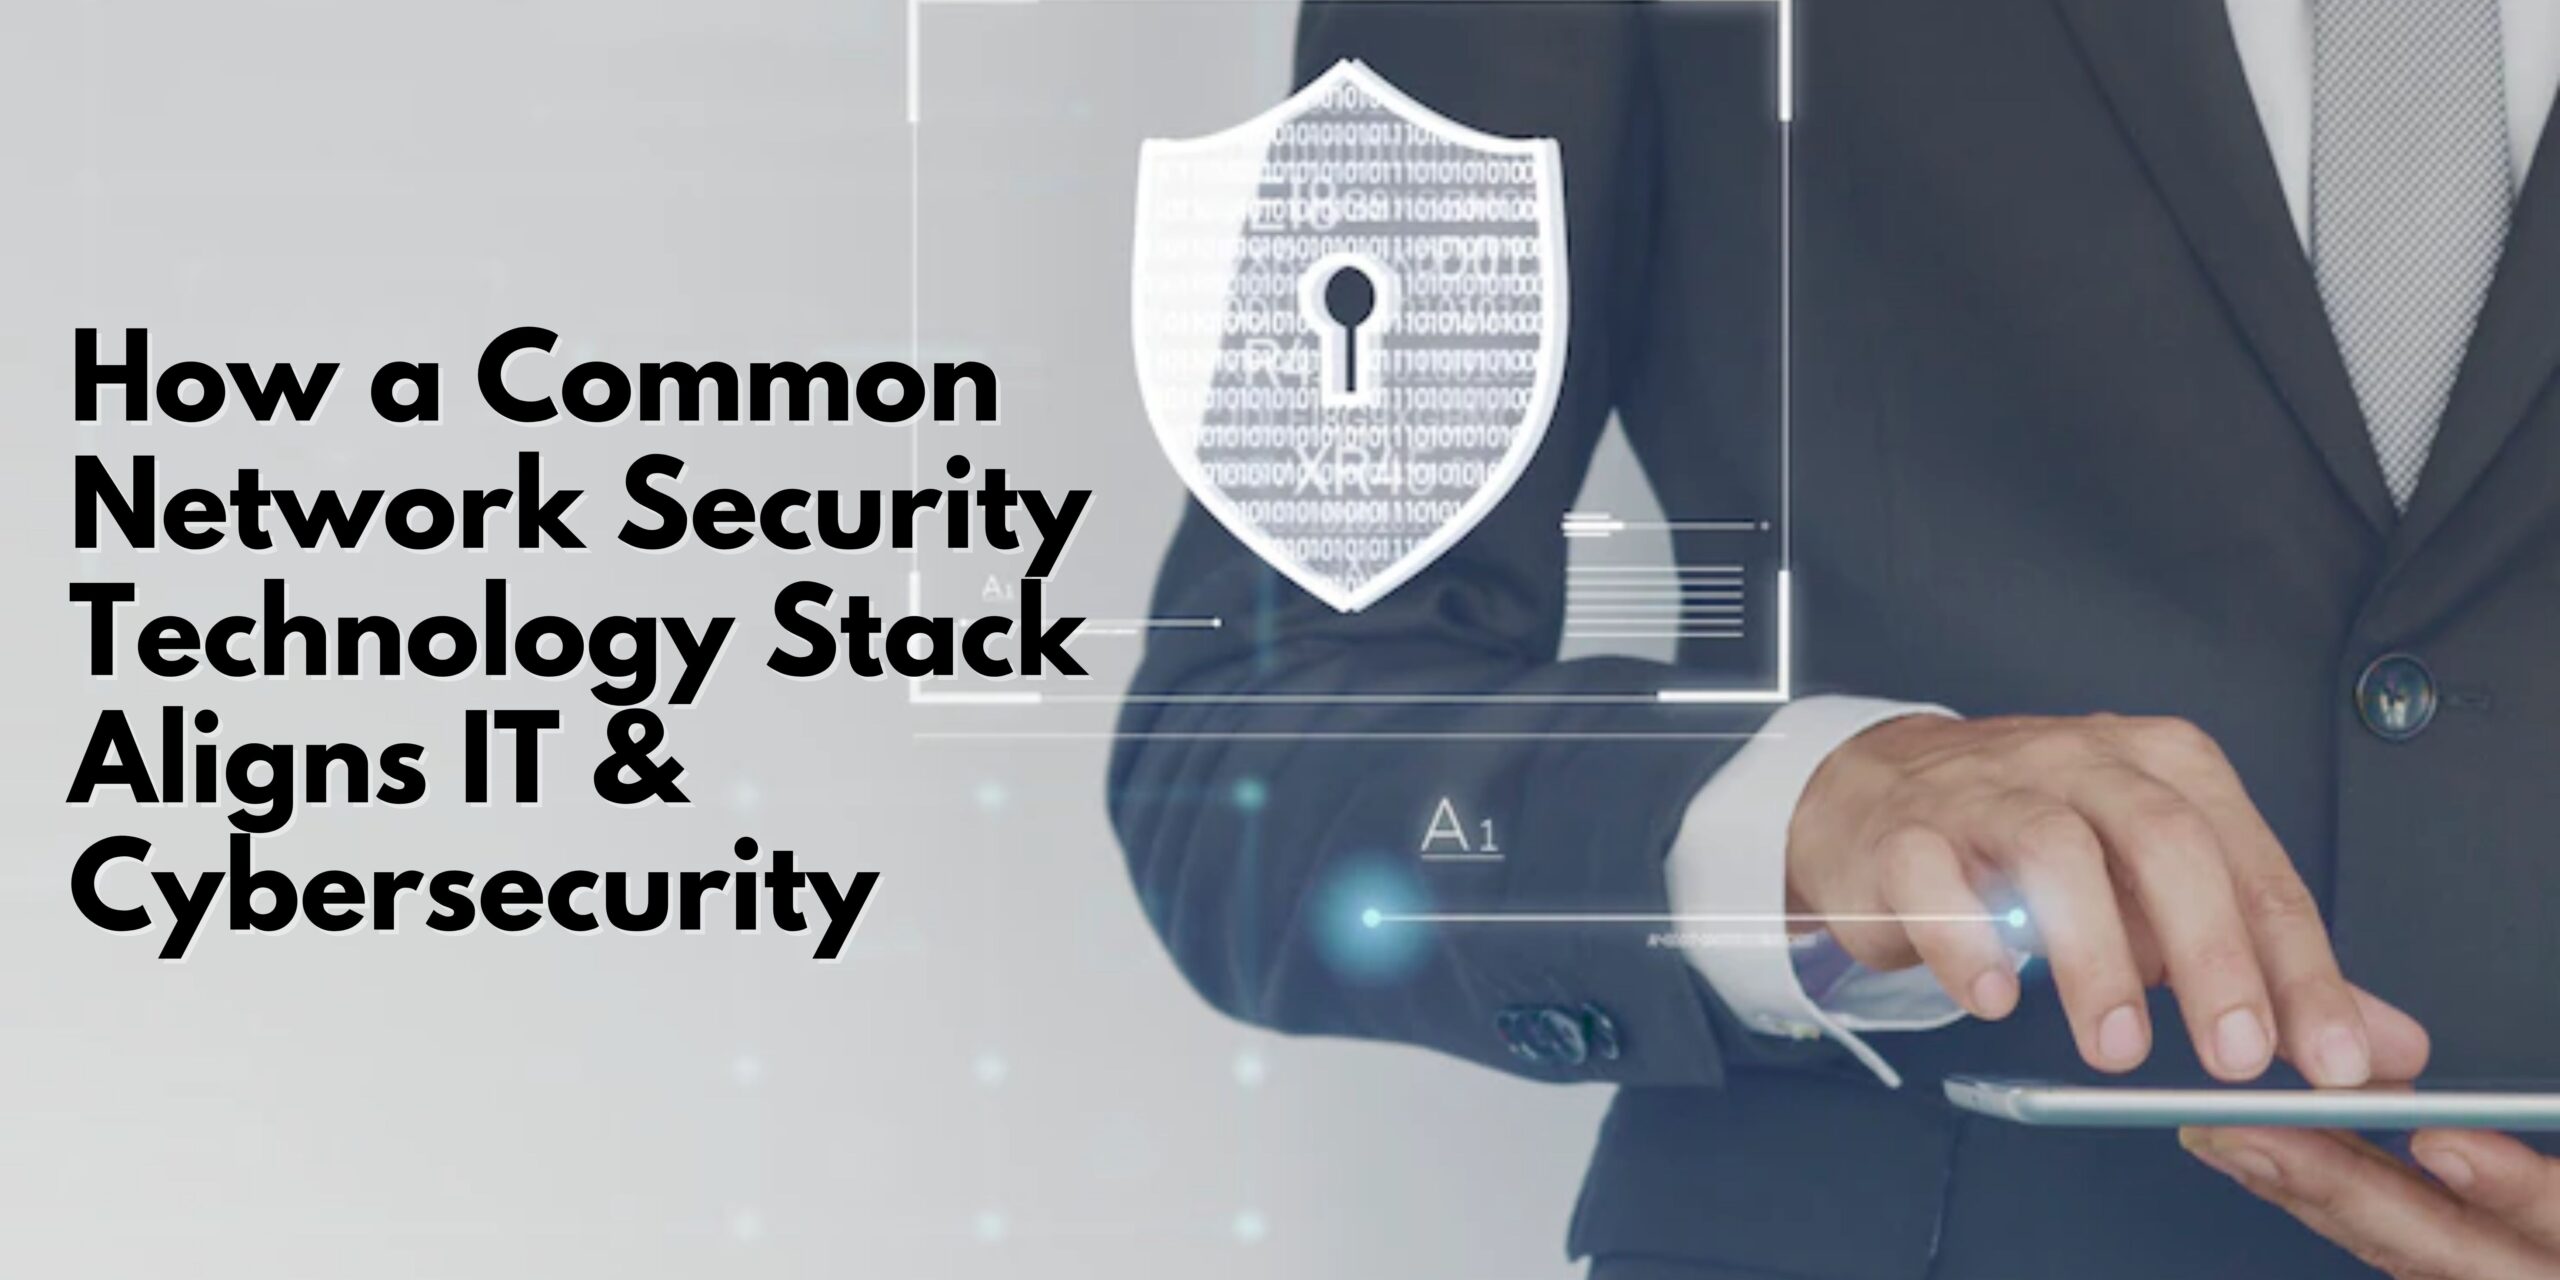 How a Common Network Security Technology Stack Aligns IT & Cybersecurity